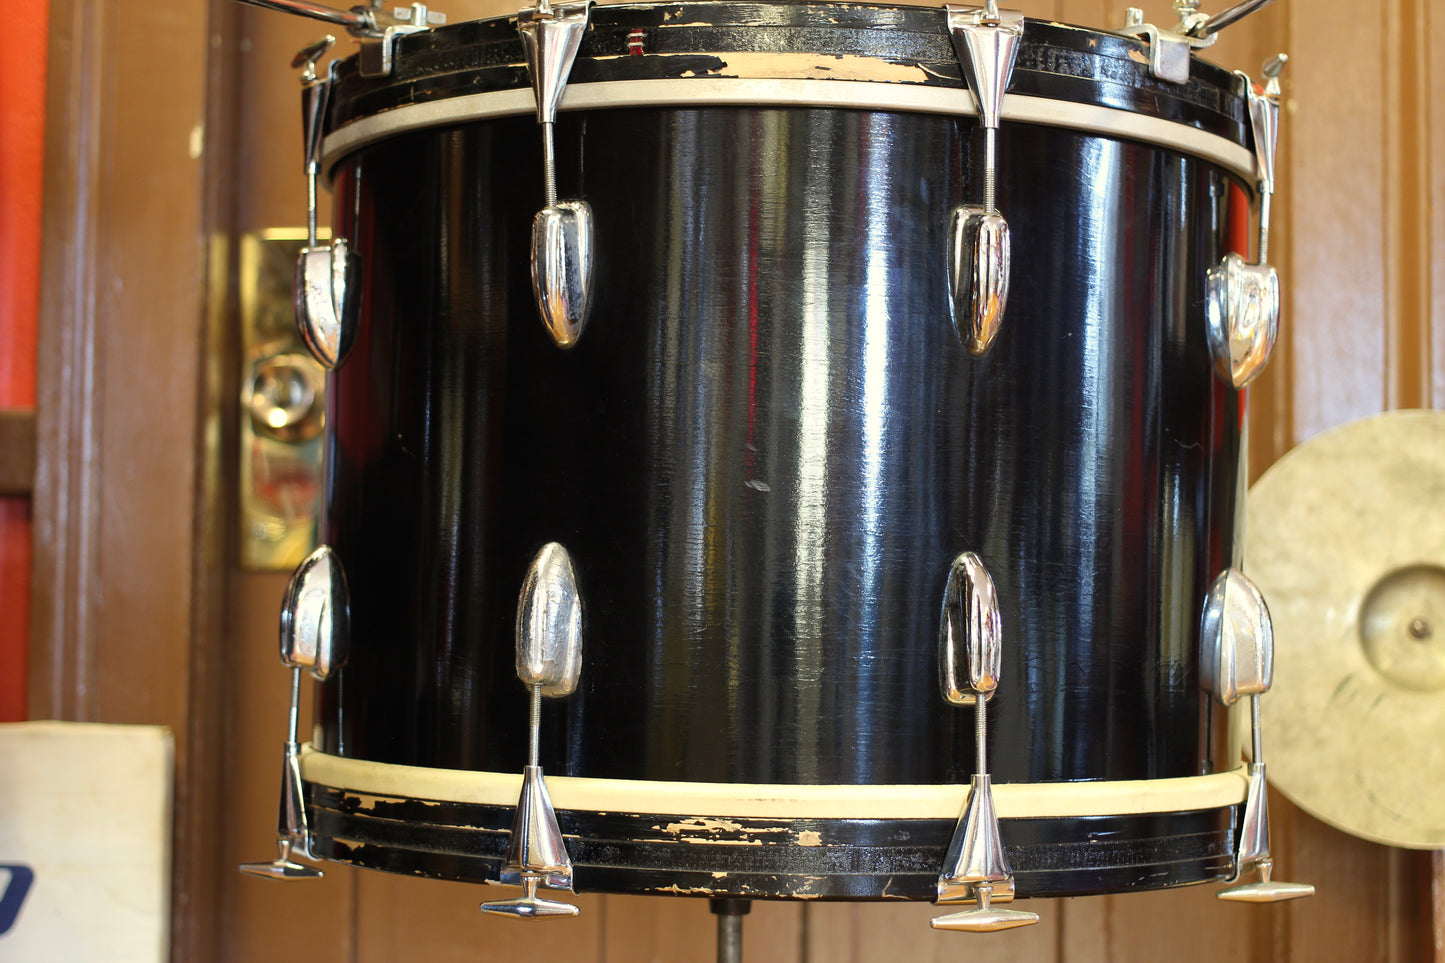 1959 Slingerland 'Swing Master' Outfit in Black Lacquer 14x20 8x12 5.5x14